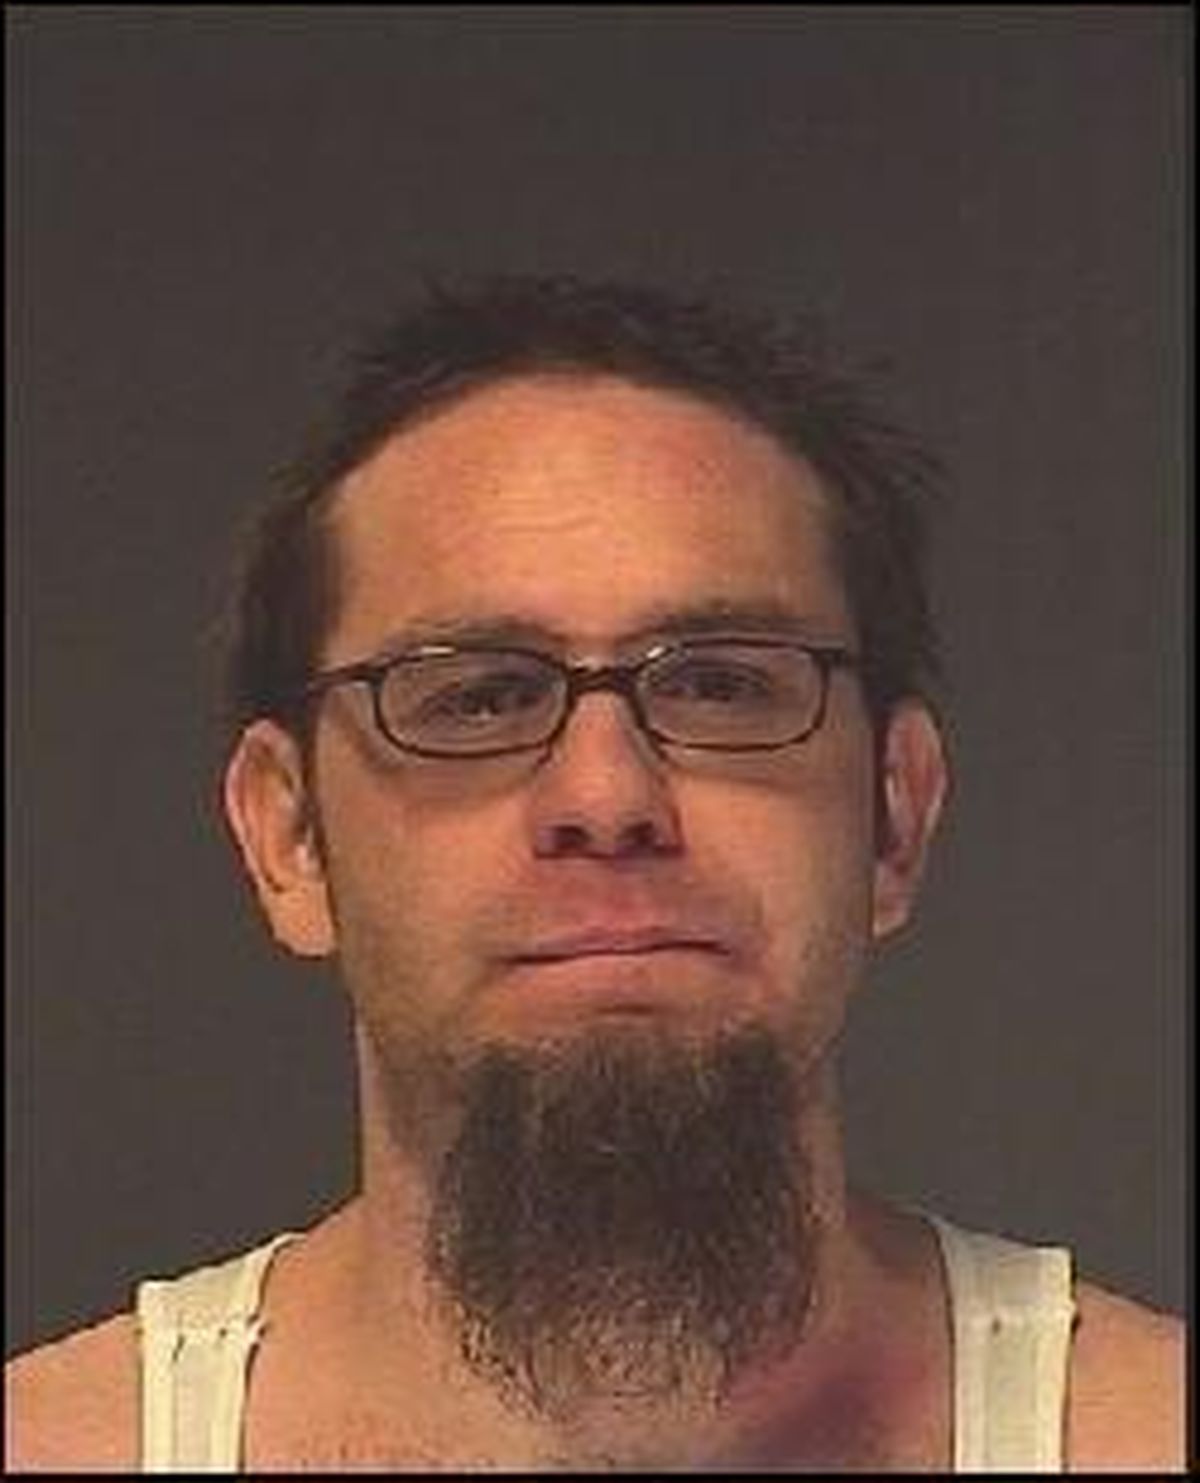 Derrick G. Bonato, 35, is a suspect in a fatal stabbing at the West Wynn Motel on Friday, April 29, 2016. (Spokane Police Department)